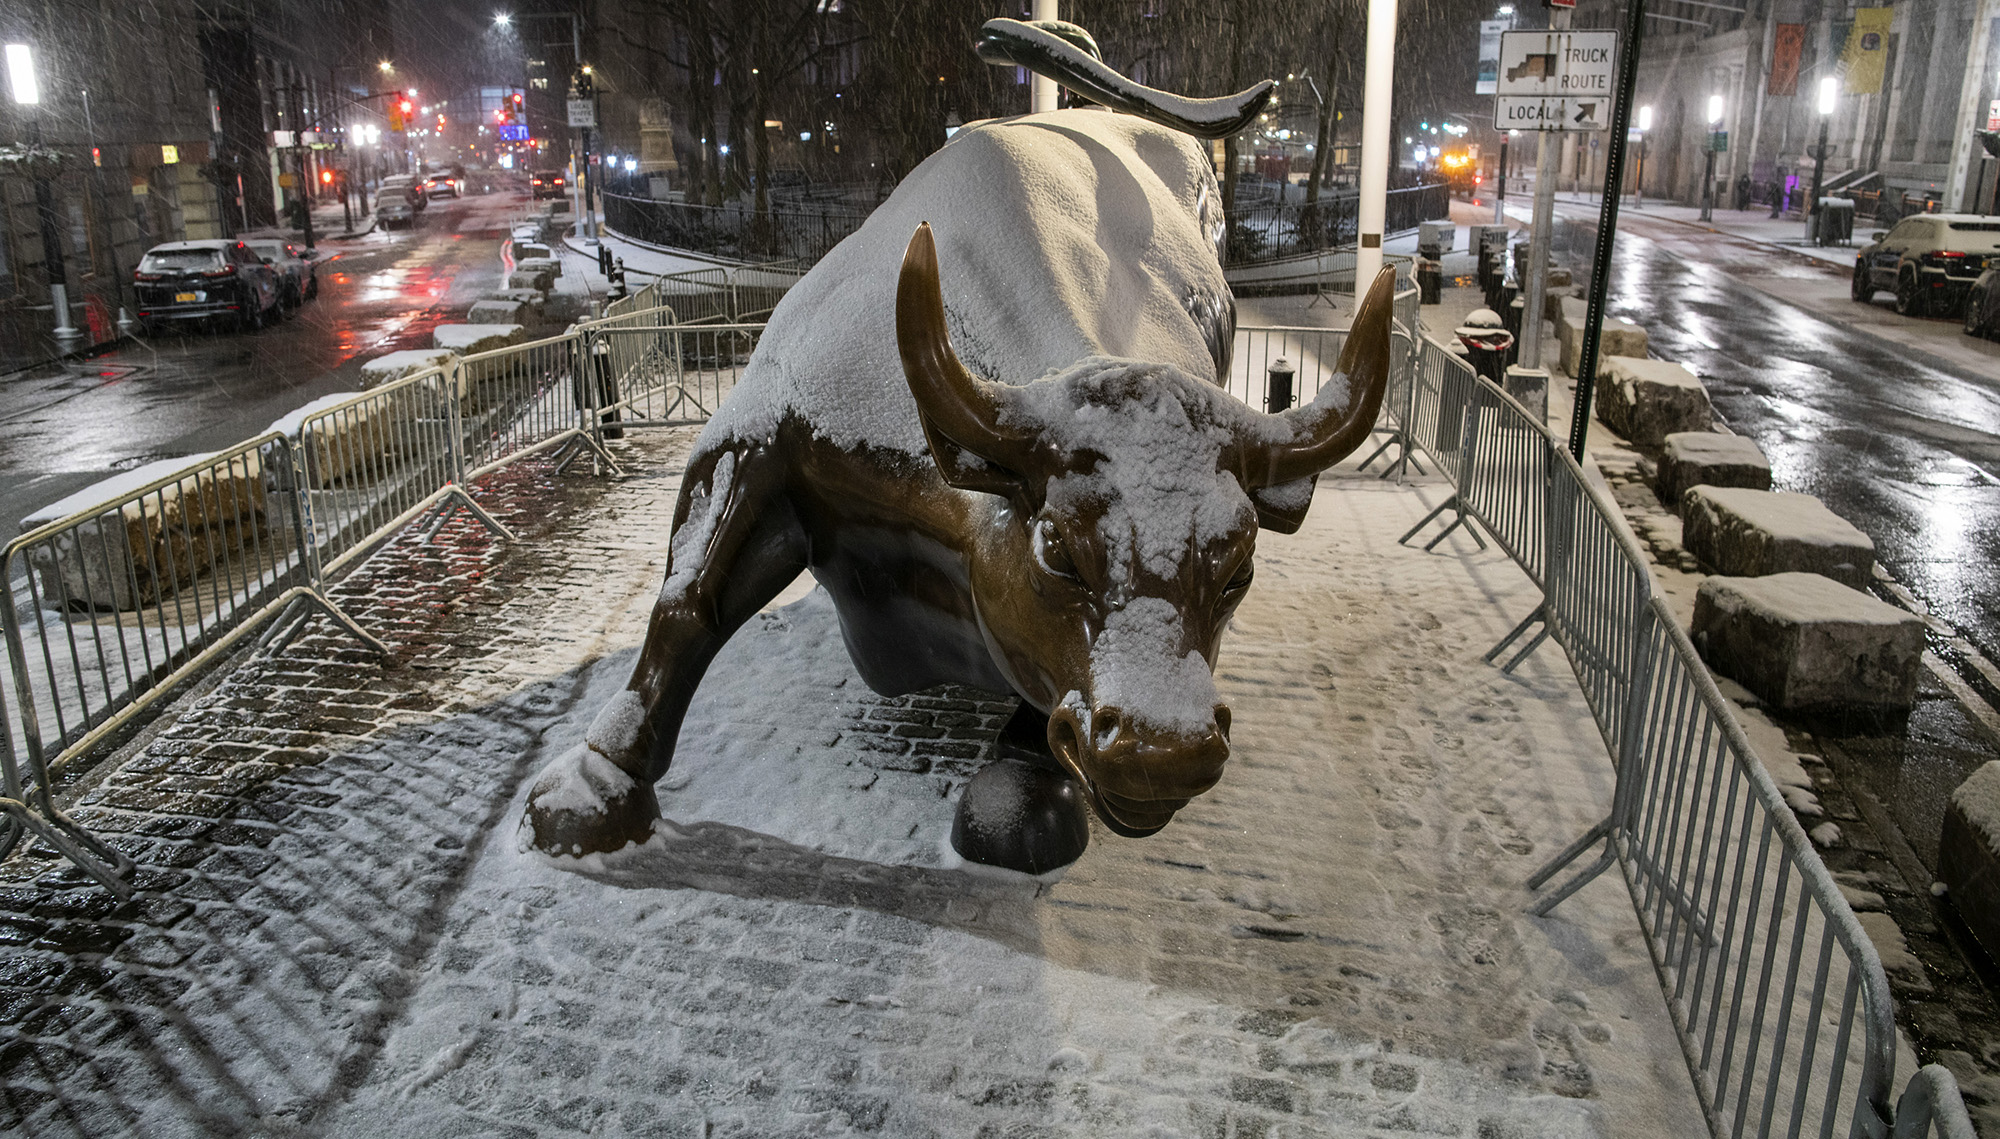 The bull of Wall Street.